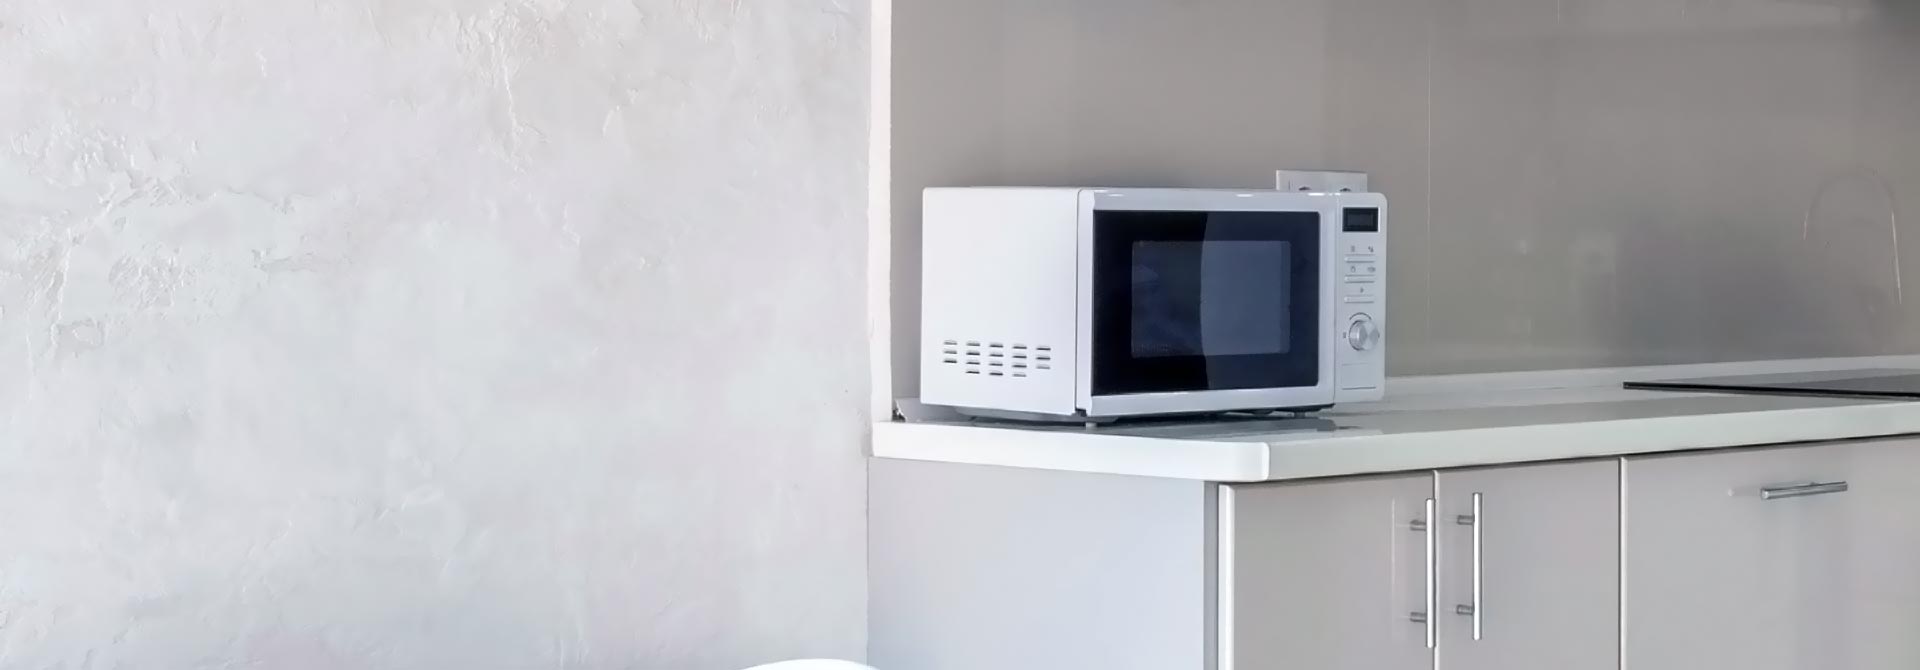 new microwave oven